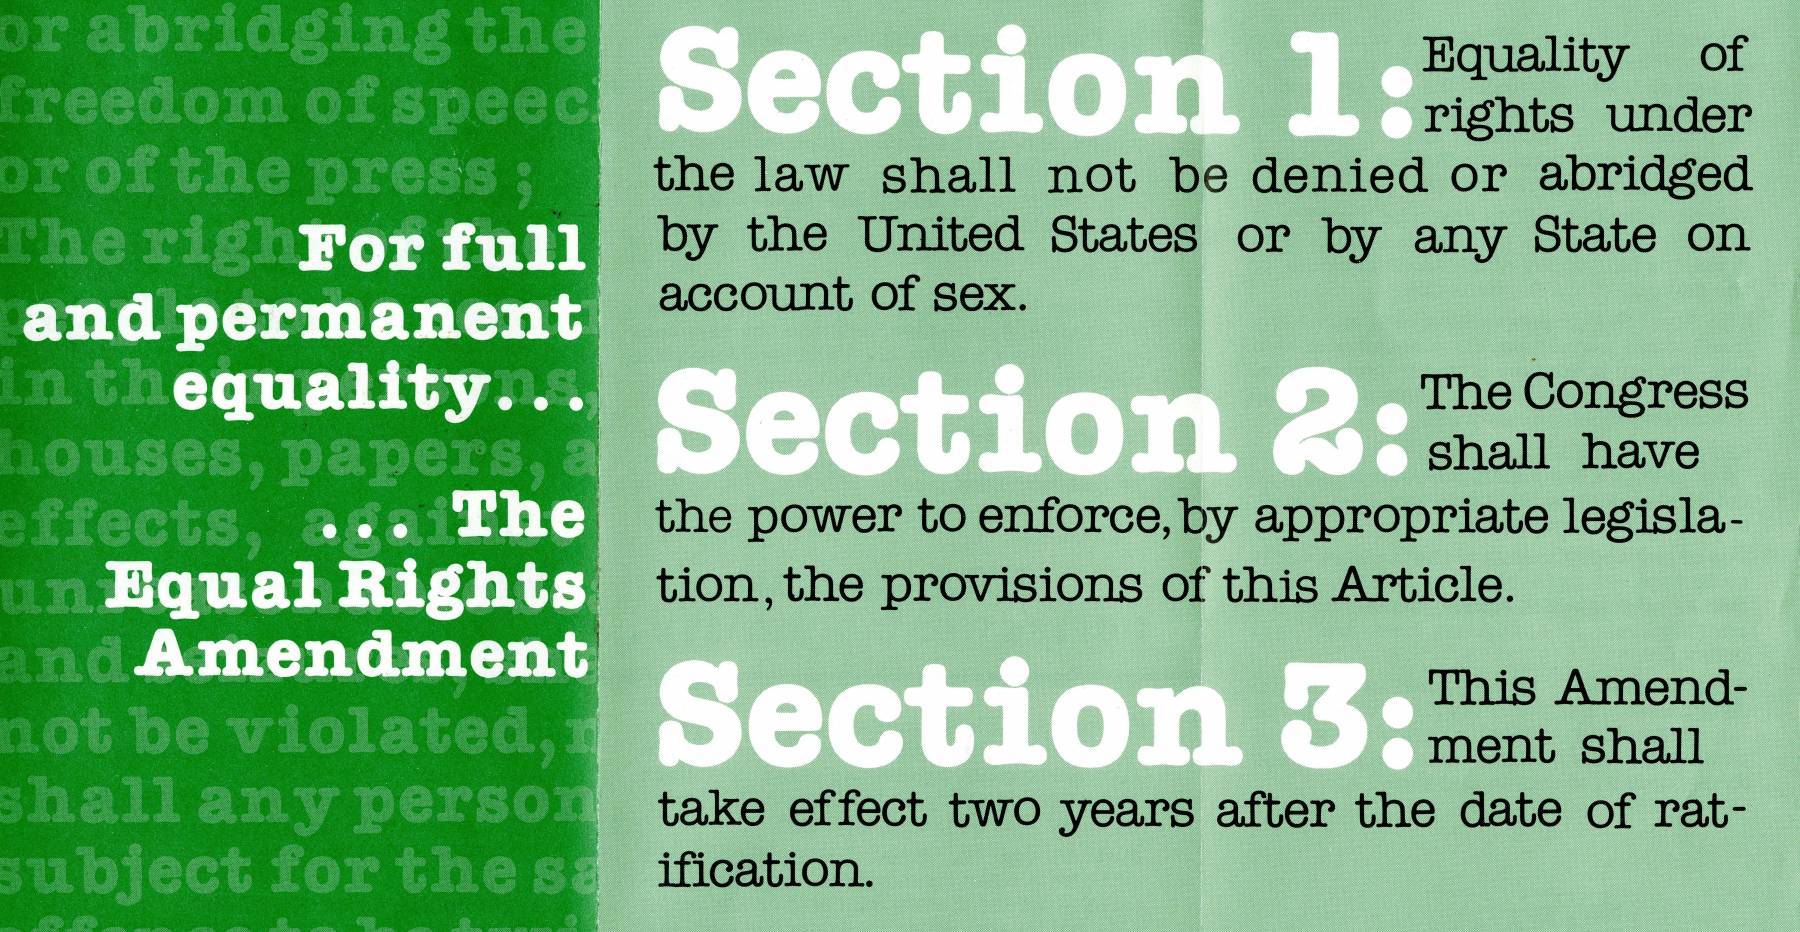 The Equal Rights Amendment. Section 1: Equality of rights under the law shall not be denied or abridged by the United States or by any State on account of sex. Section 2: The Congress shall have the power to enforce, by appropriate legislation, the provisions of the Article. Section 3: This Amendment shall take effect two years after the date of ratification.